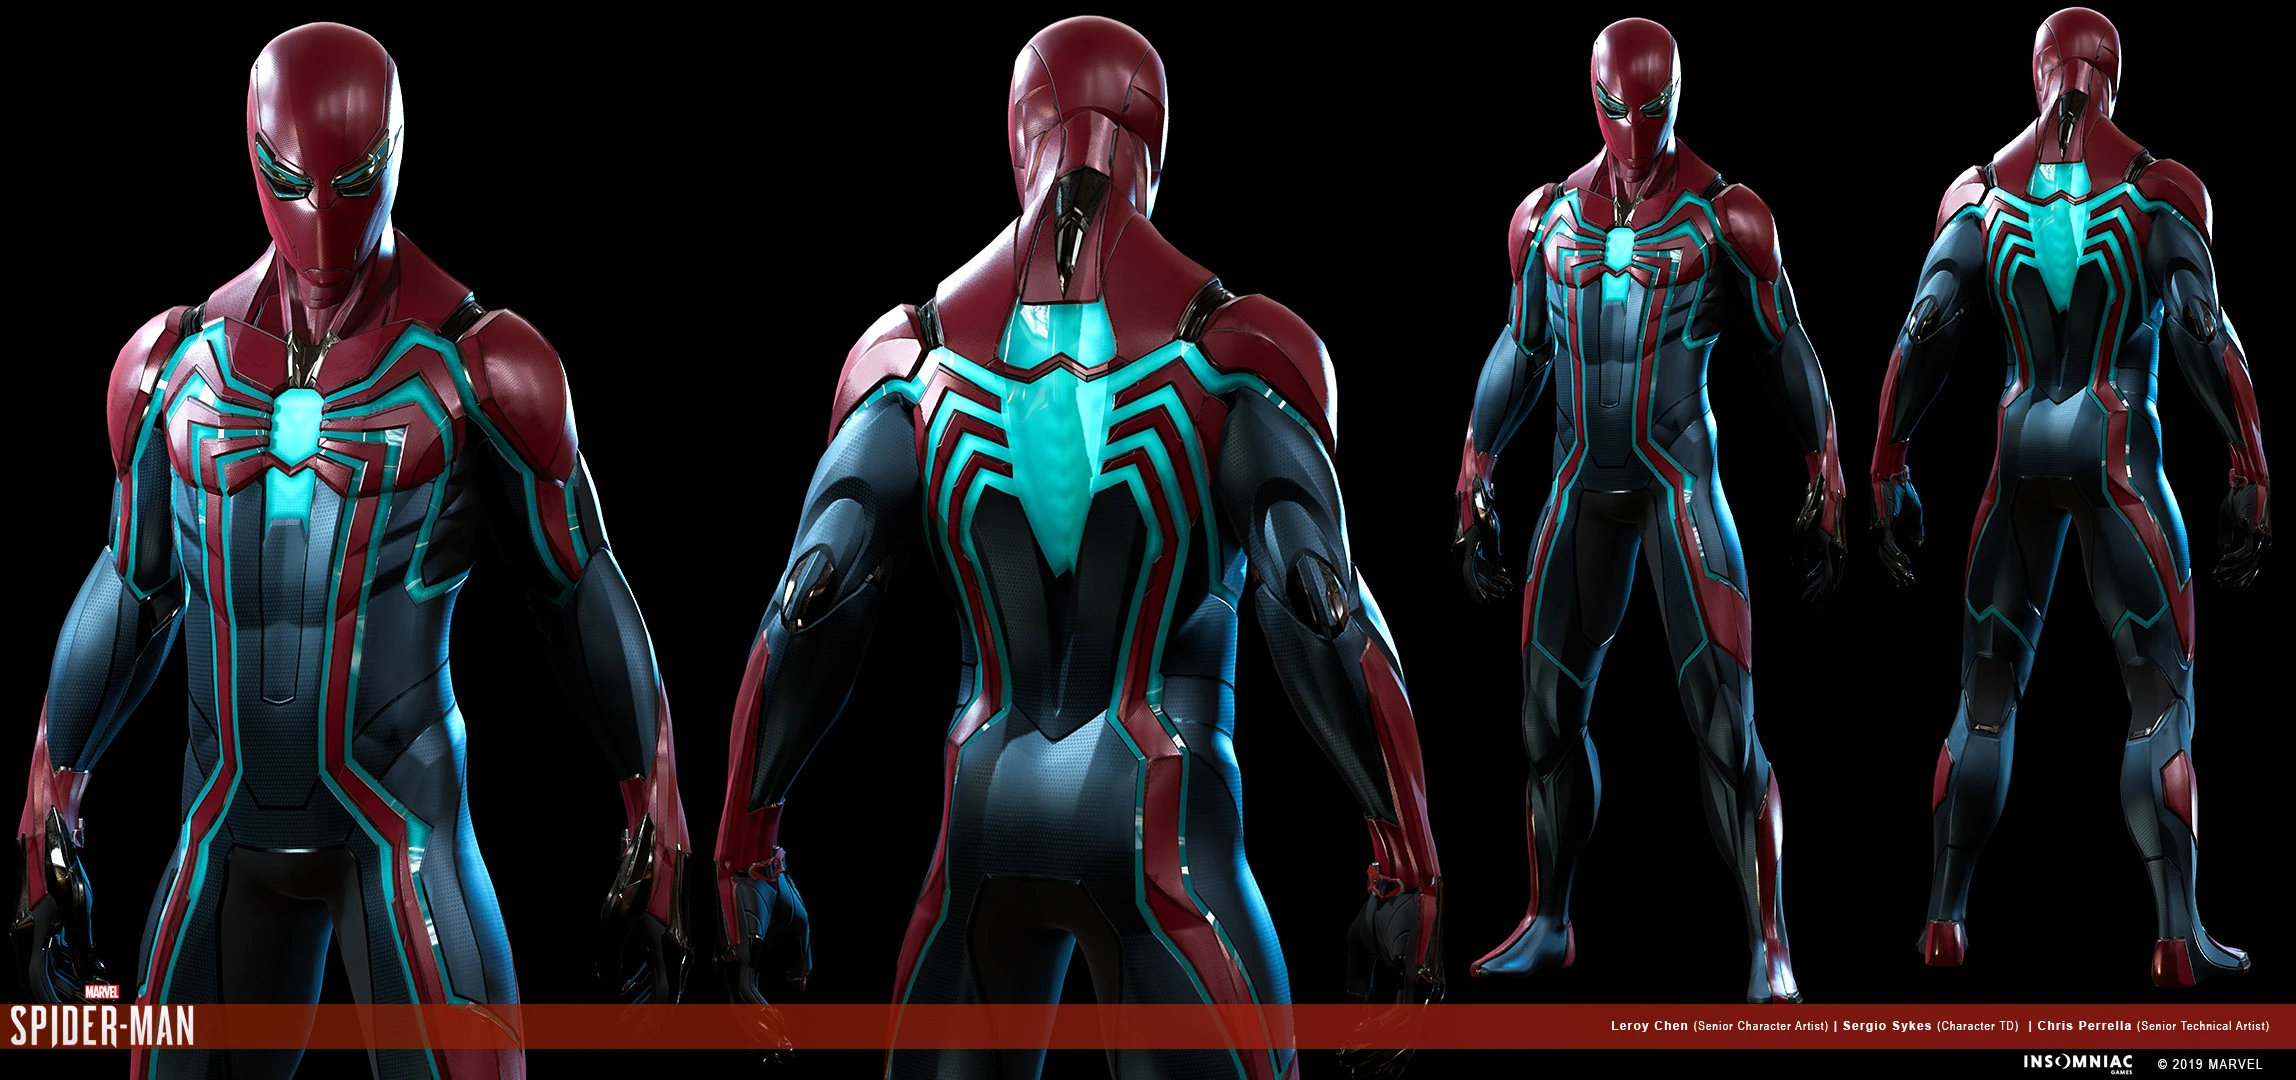 Velocity is a cool suit : r/SpidermanPS4